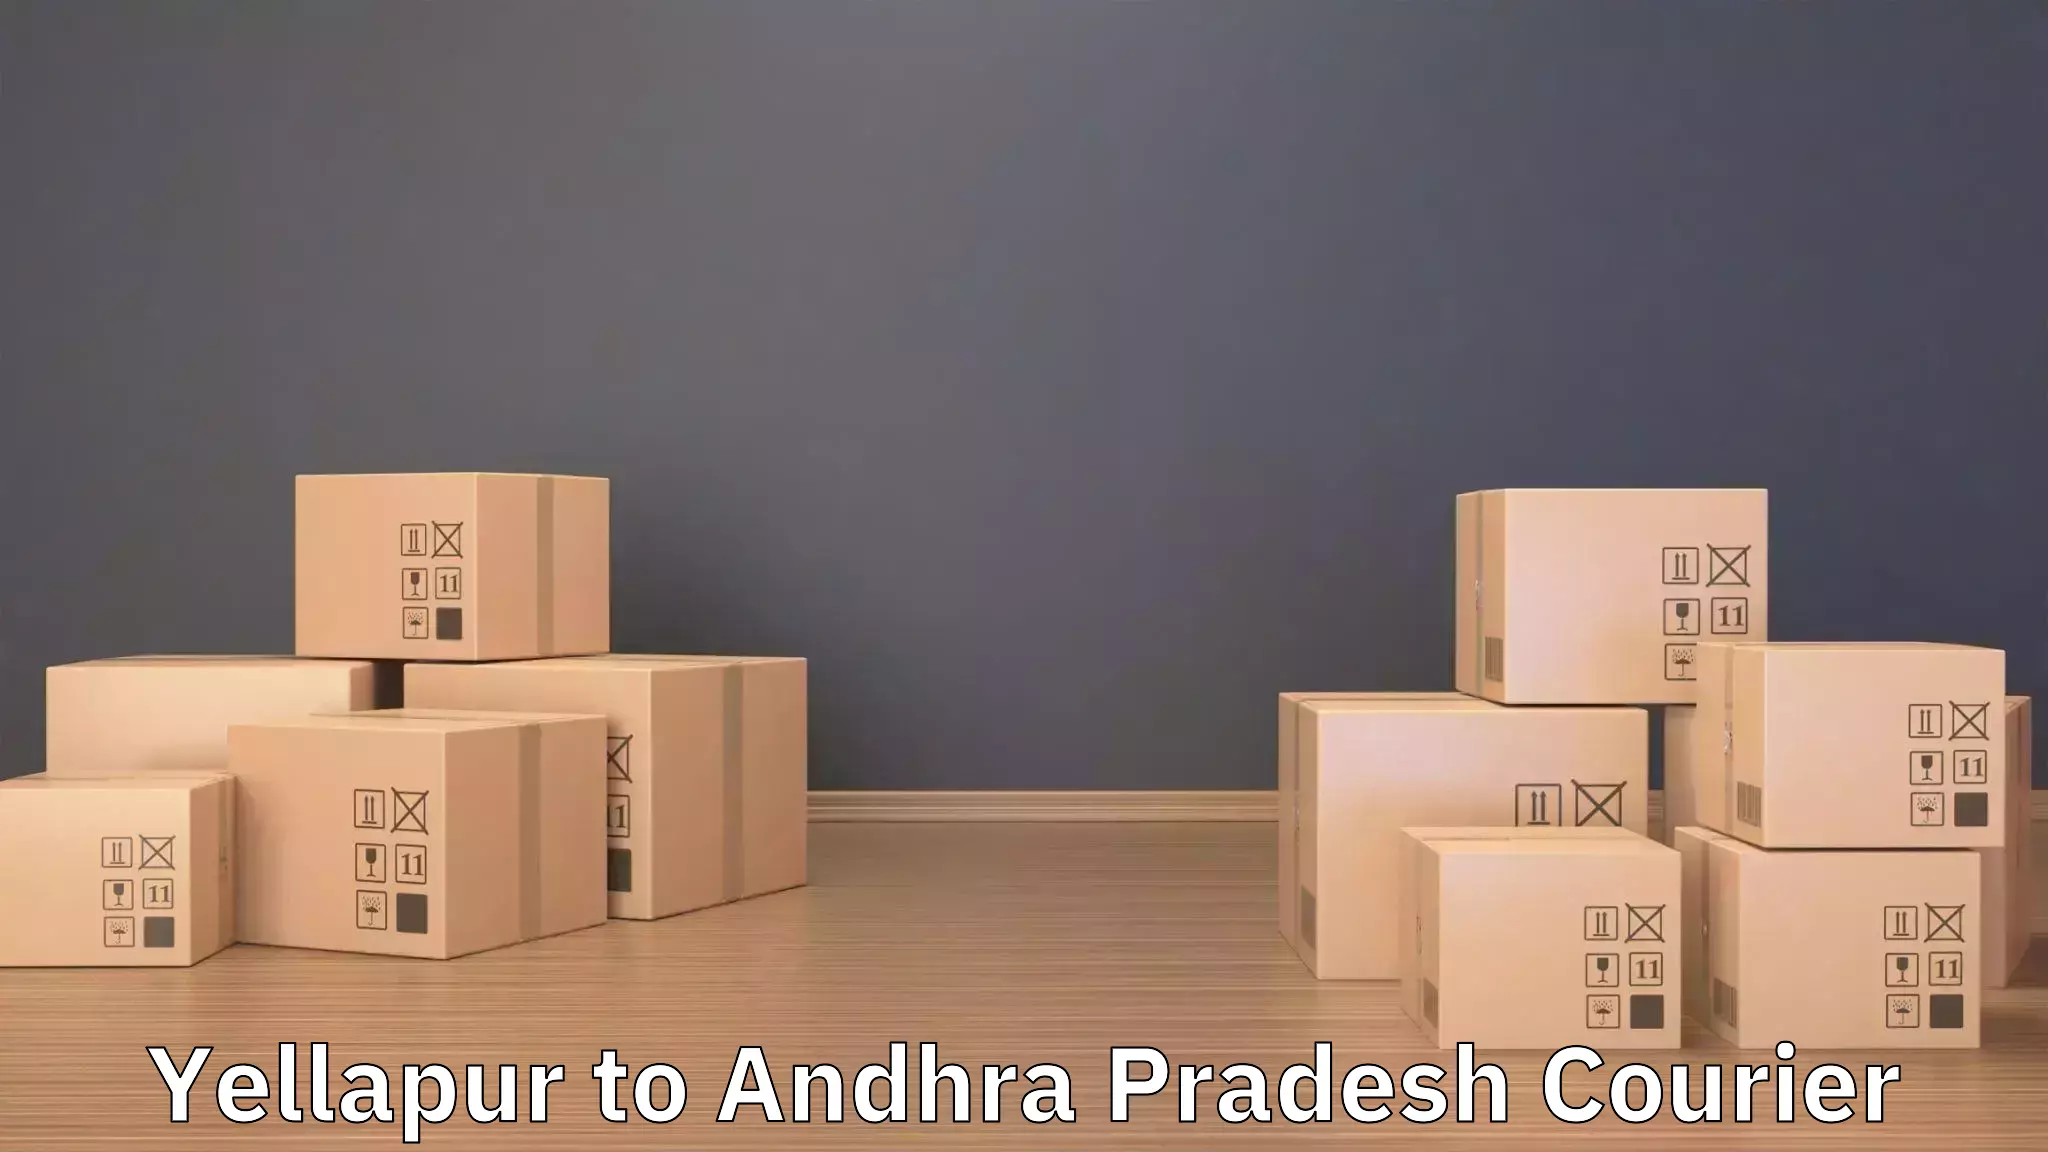 Reliable relocation services in Yellapur to Annavaram